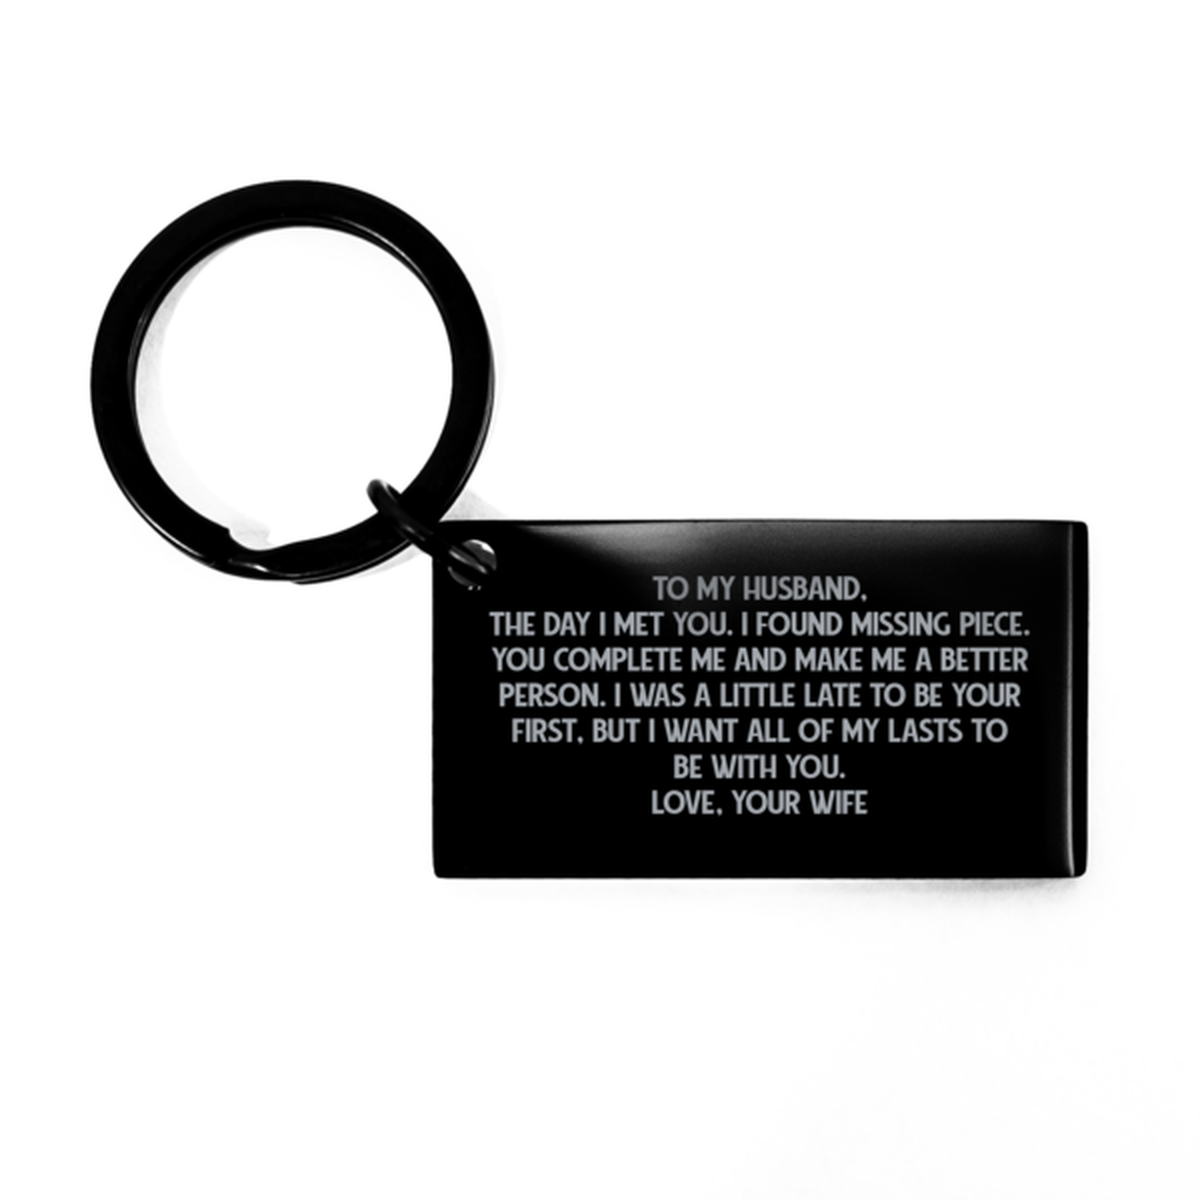 To My Husband Black Keychain, I Found Missing Piece, Anniversary Gifts For Husband From Wife, Birthday Gifts For Men